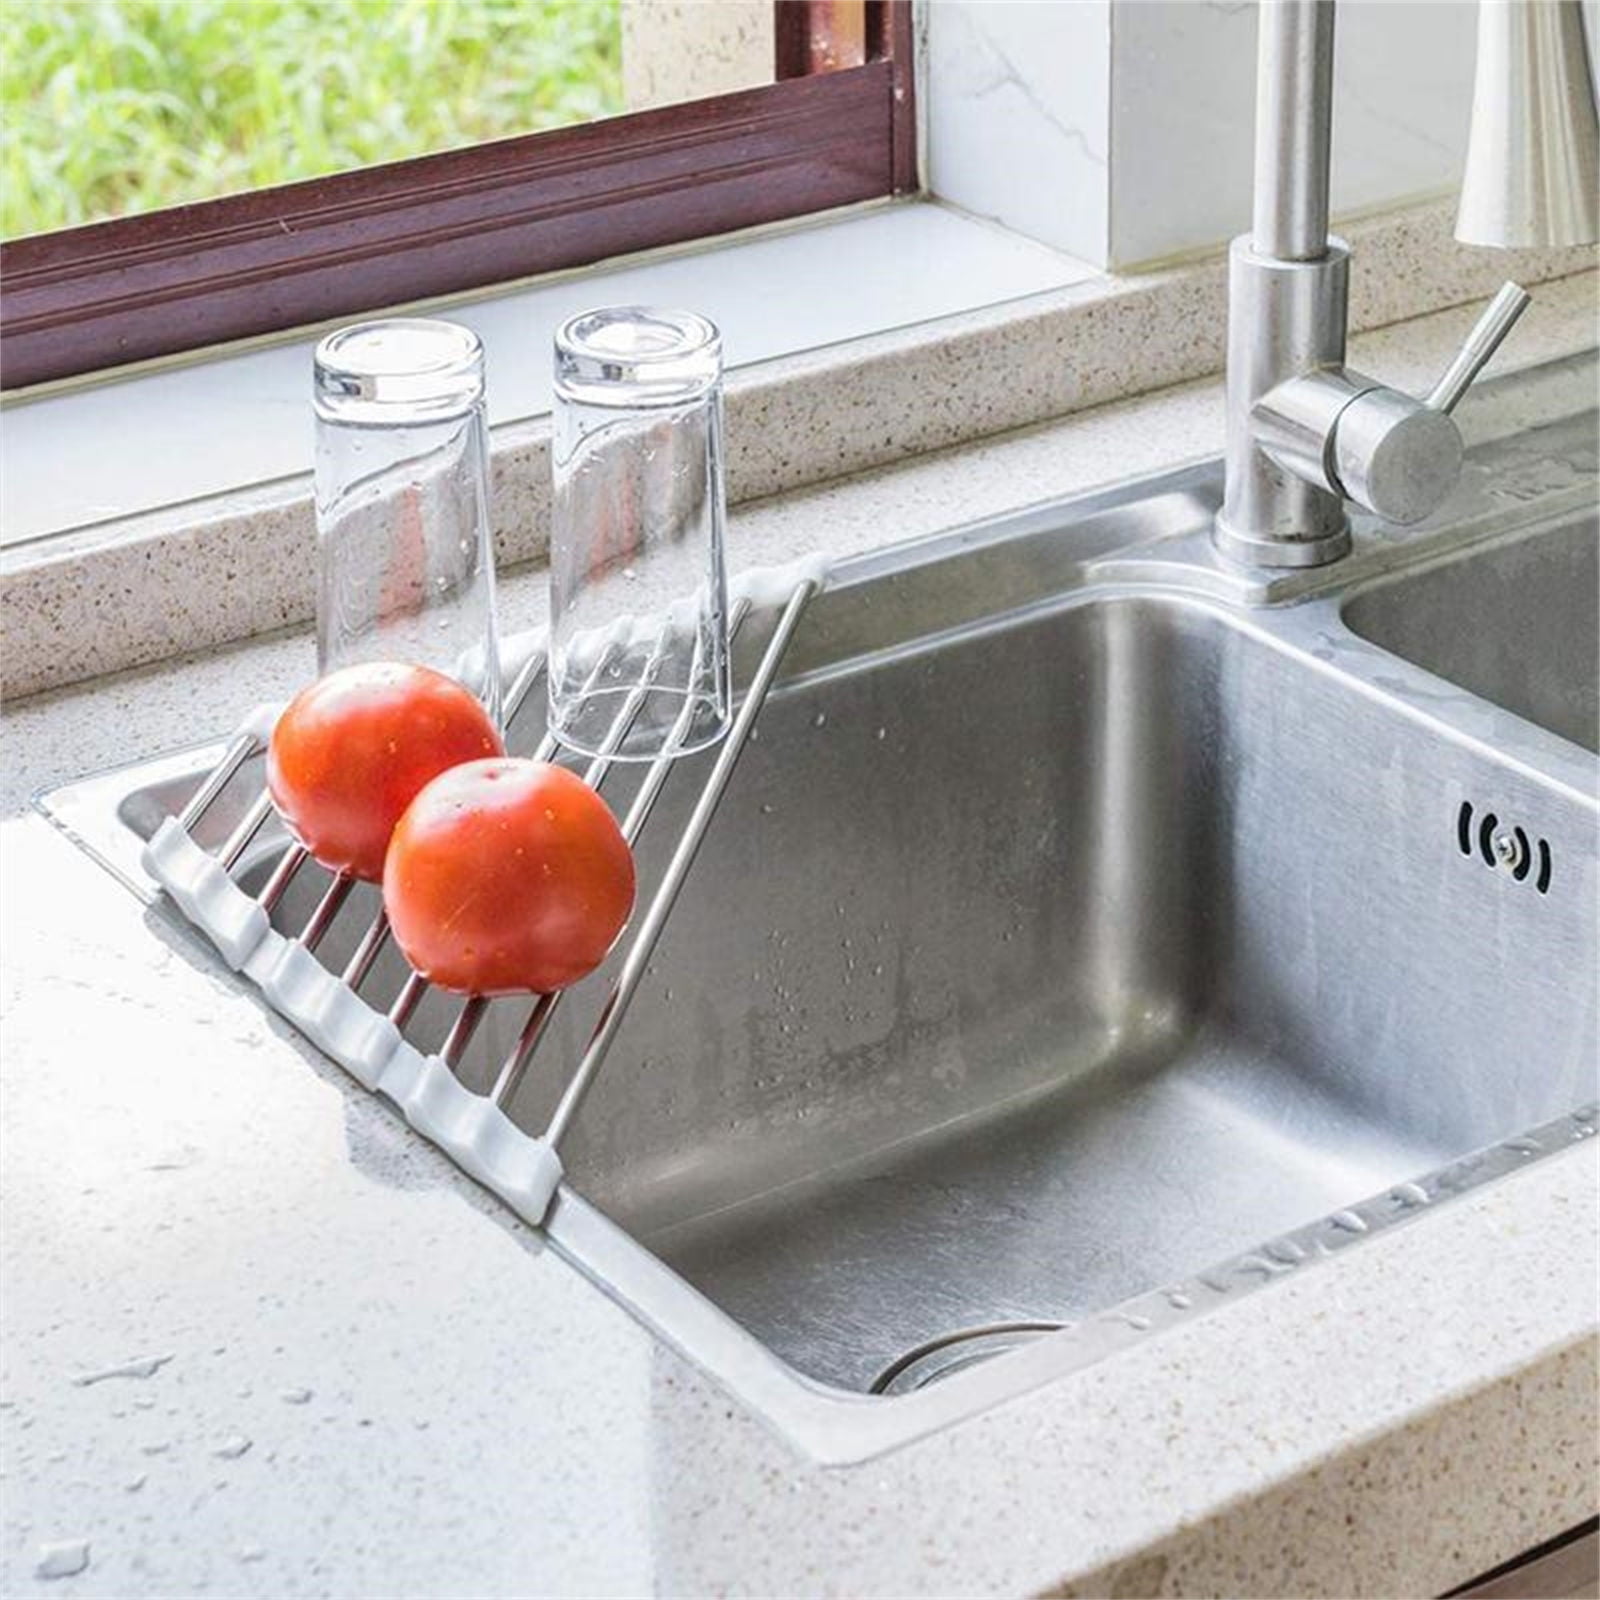 CFXNMZGR Drain Rack Expandable Roll-Up Dish Drying Rack For Kitchen,  Collapsible Over-The-Sink Dish Drying Rack With Space-Saving Design